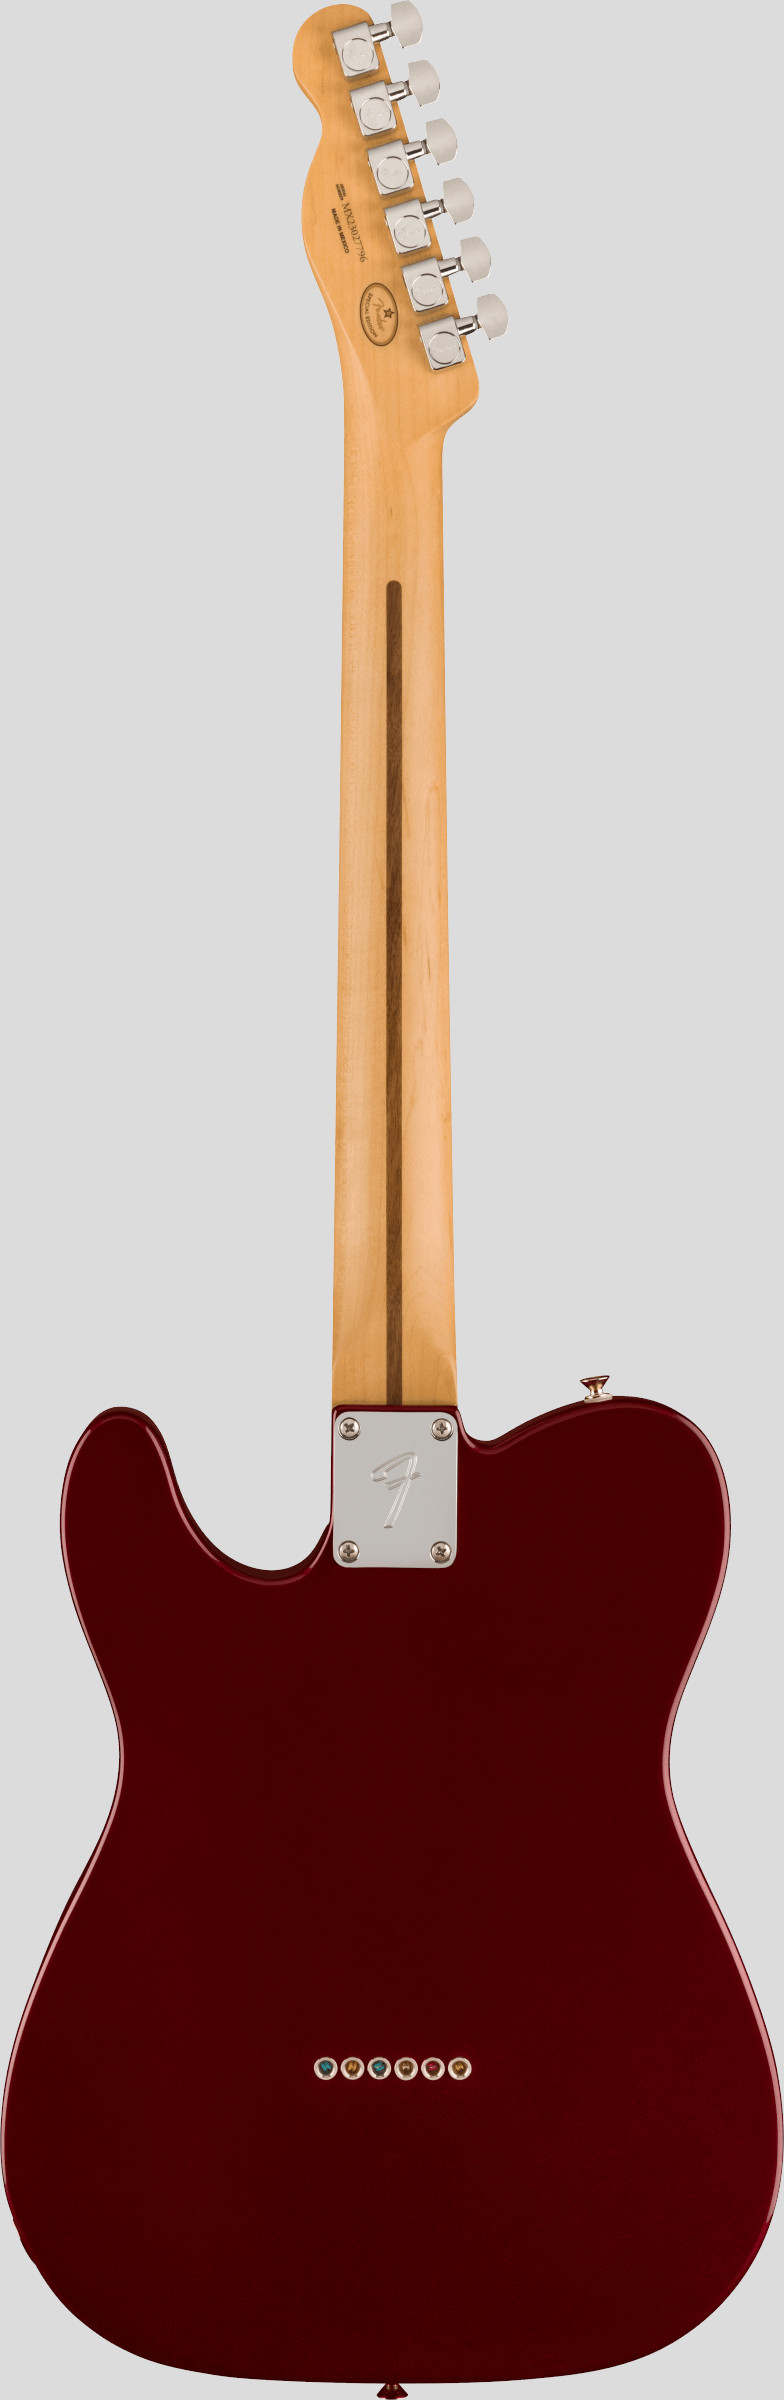 Fender Limited Edition Player Telecaster Oxblood with Ebony Fingerboard 2